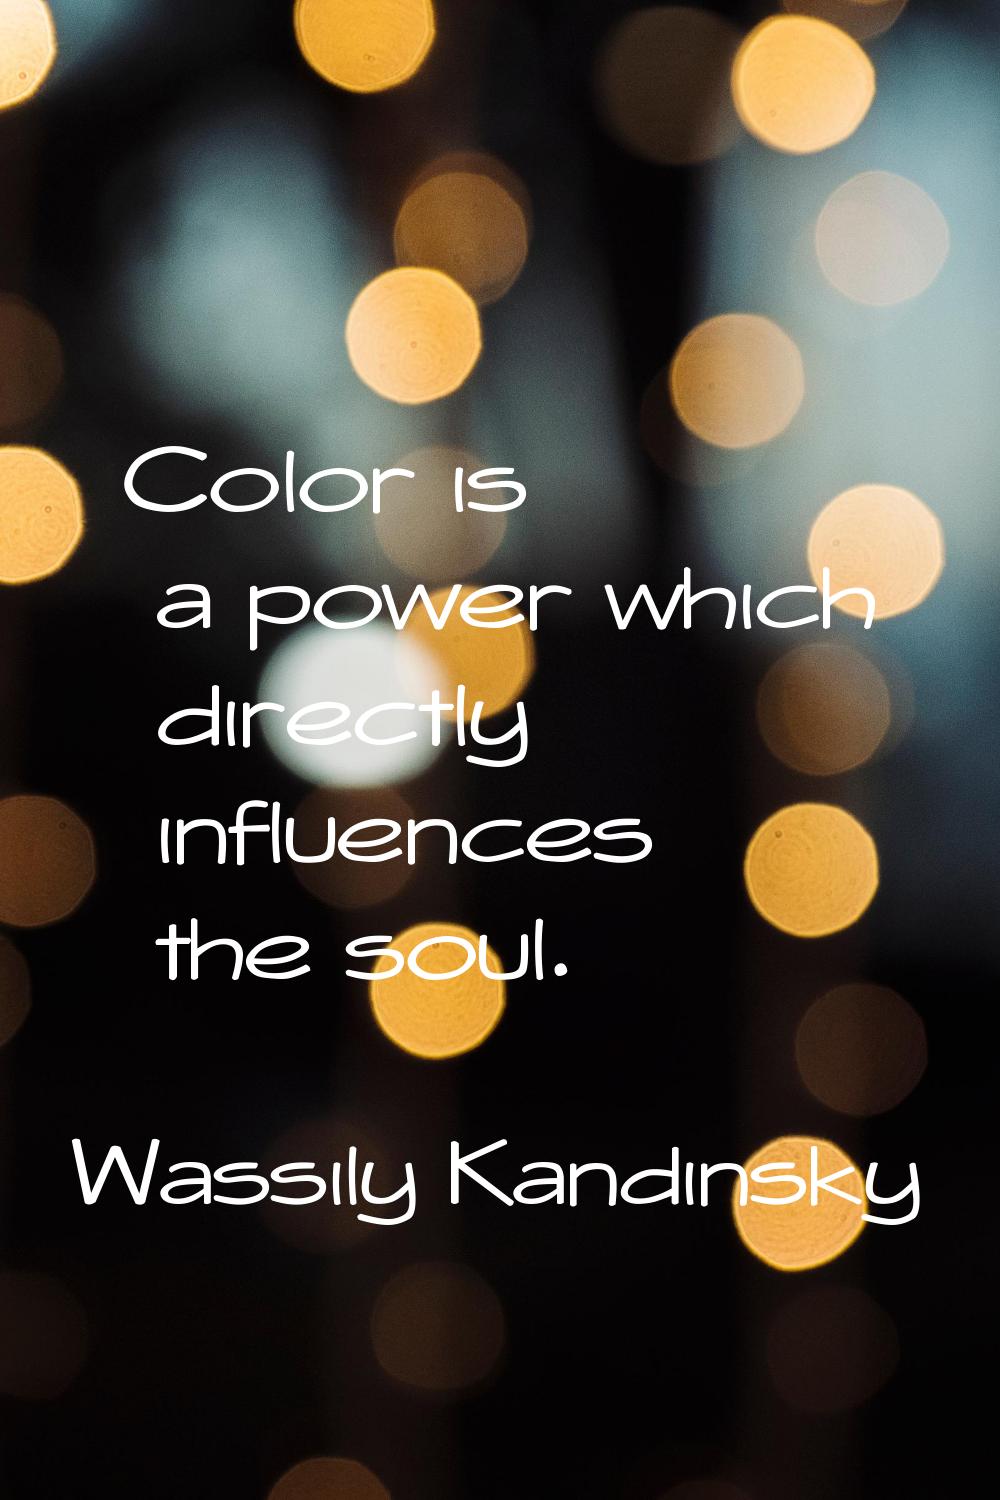 Color is a power which directly influences the soul.